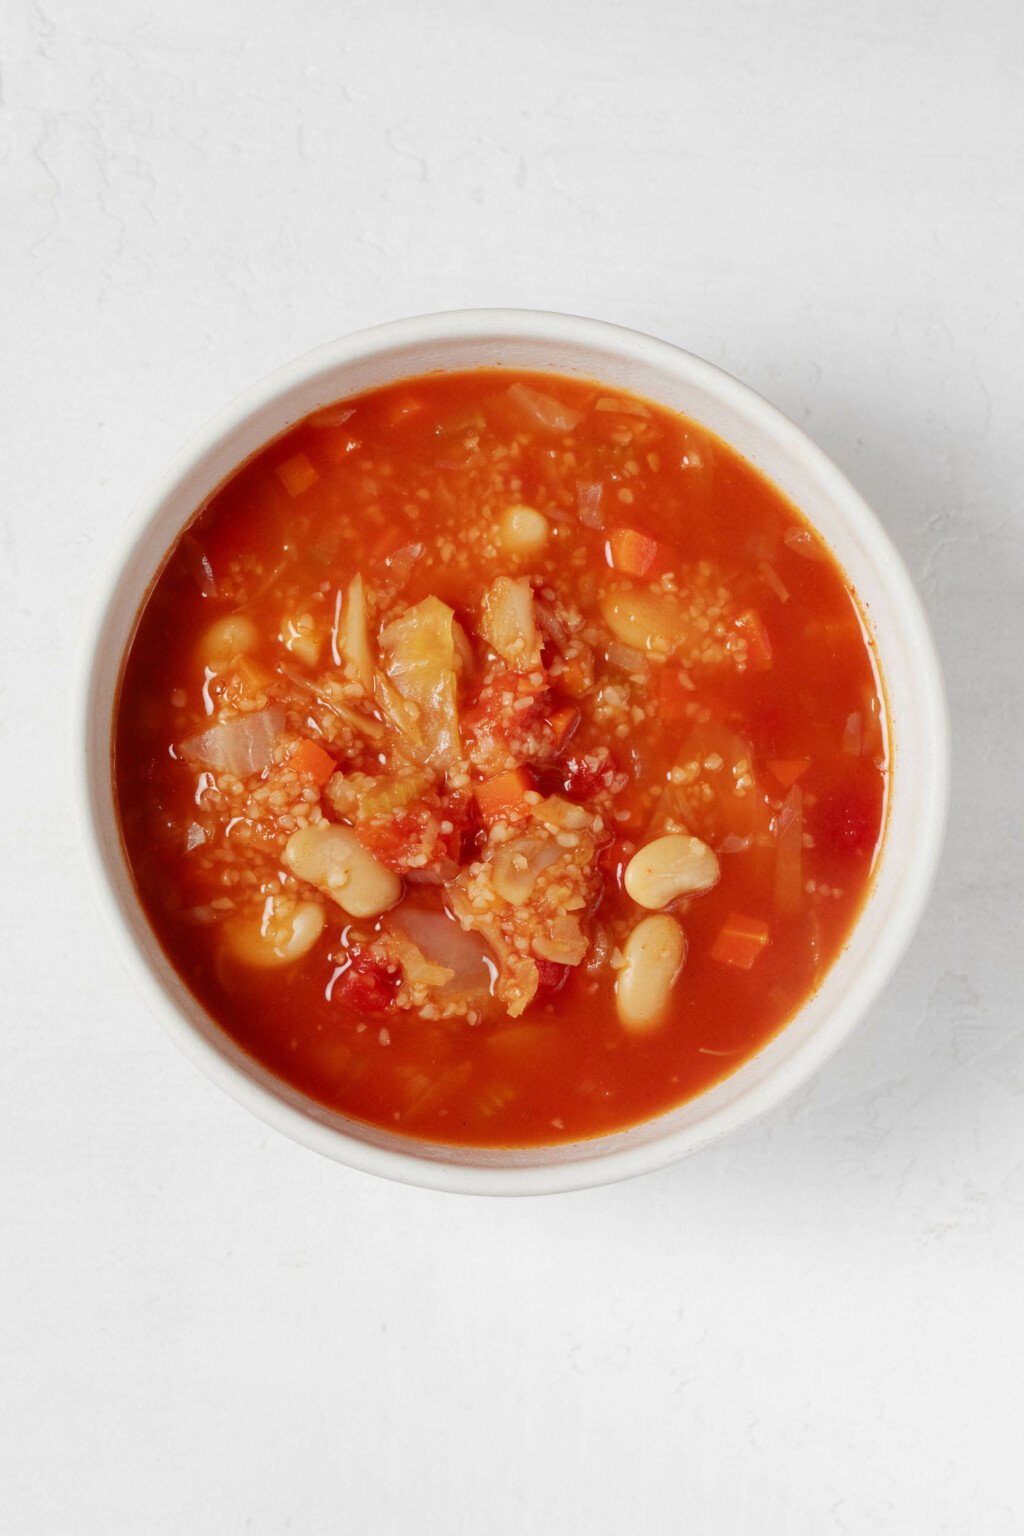 An overhead image of a white bowl of red-colored soup, which is filled with bulgur wheat and white beans.